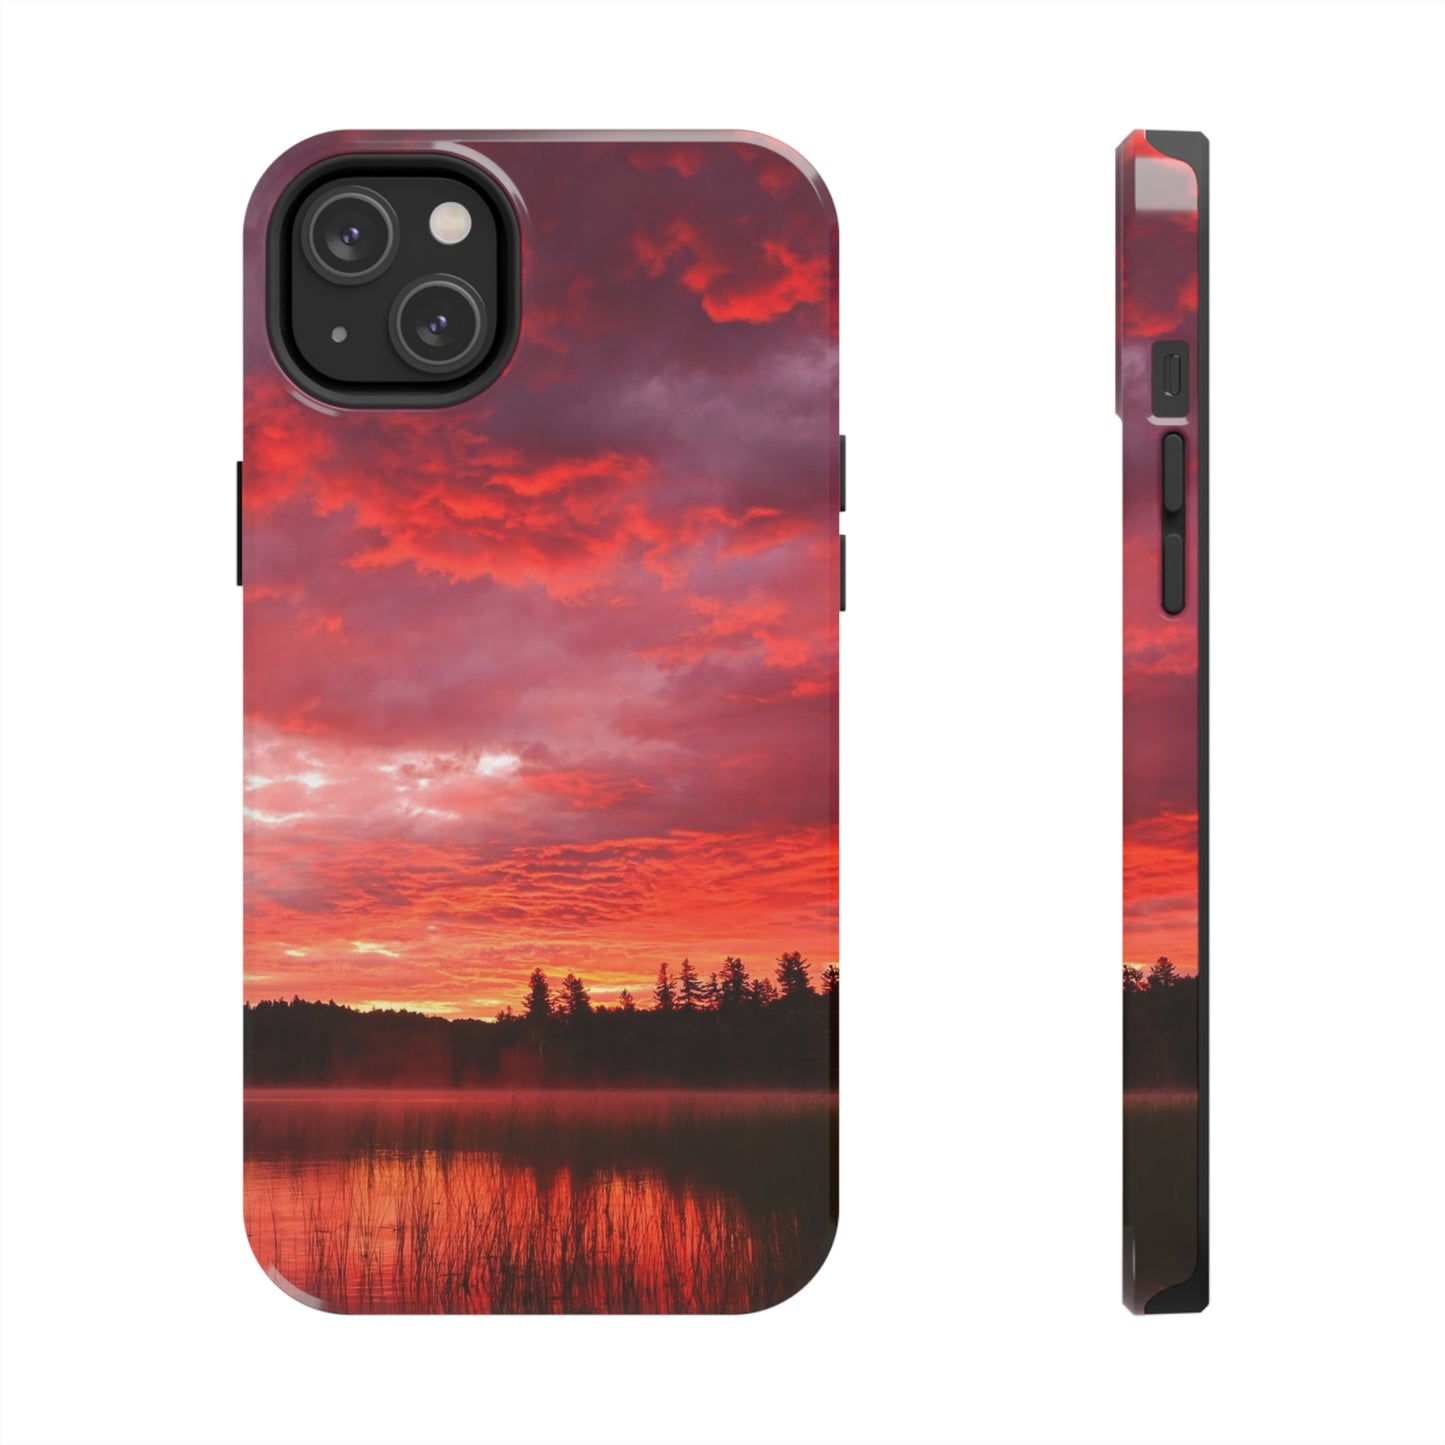 Impact Resistant Phone Case - Fire in the Sky